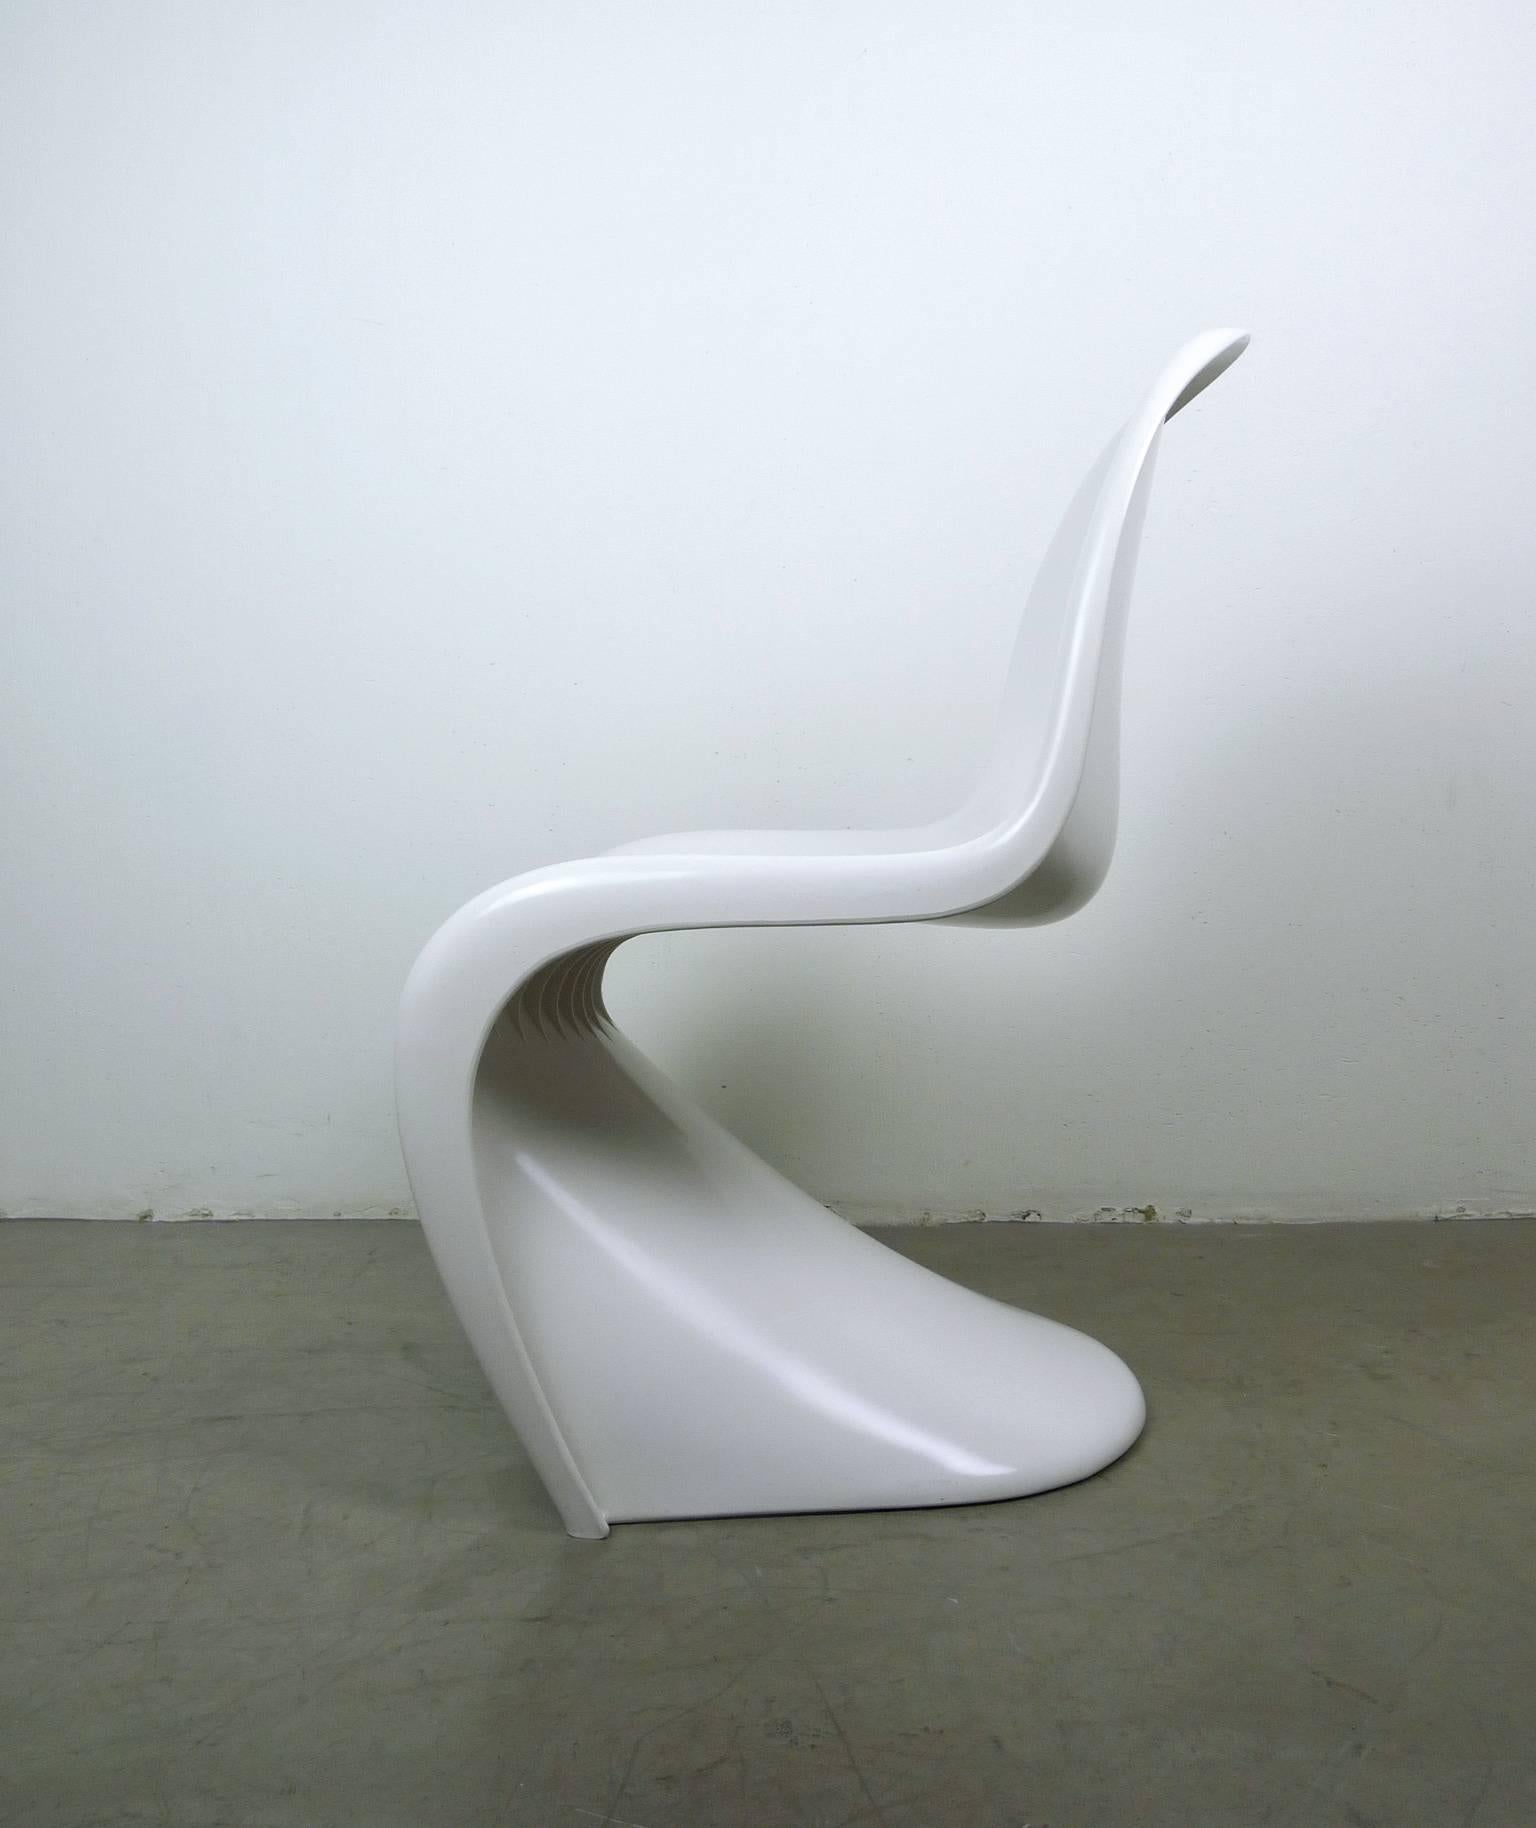 20th Century Pair of White Panton Chairs by Verner Panton for Fehlbau from 1971 and 1972 For Sale